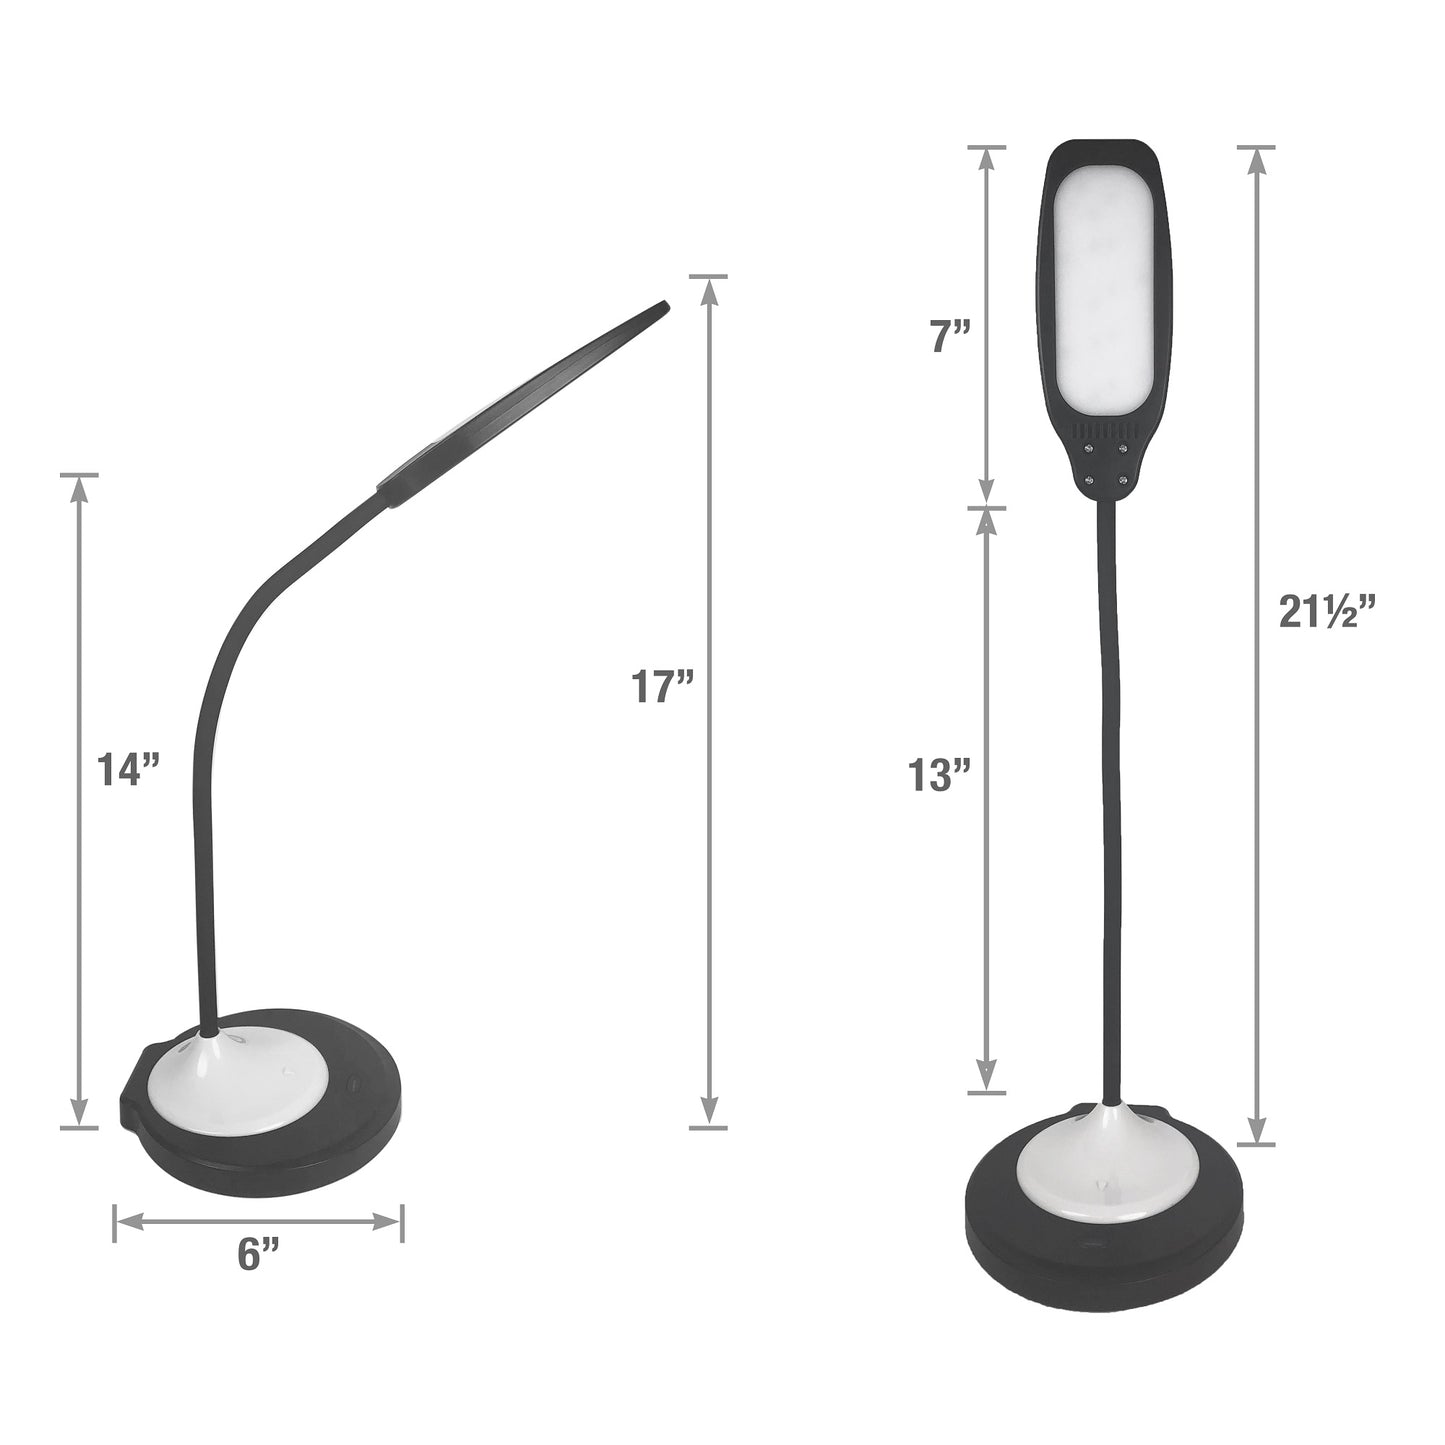 DAC® MP-356 Adjustable LED Desk Lamp/Table Lamp with USB Charging Port, White and Black